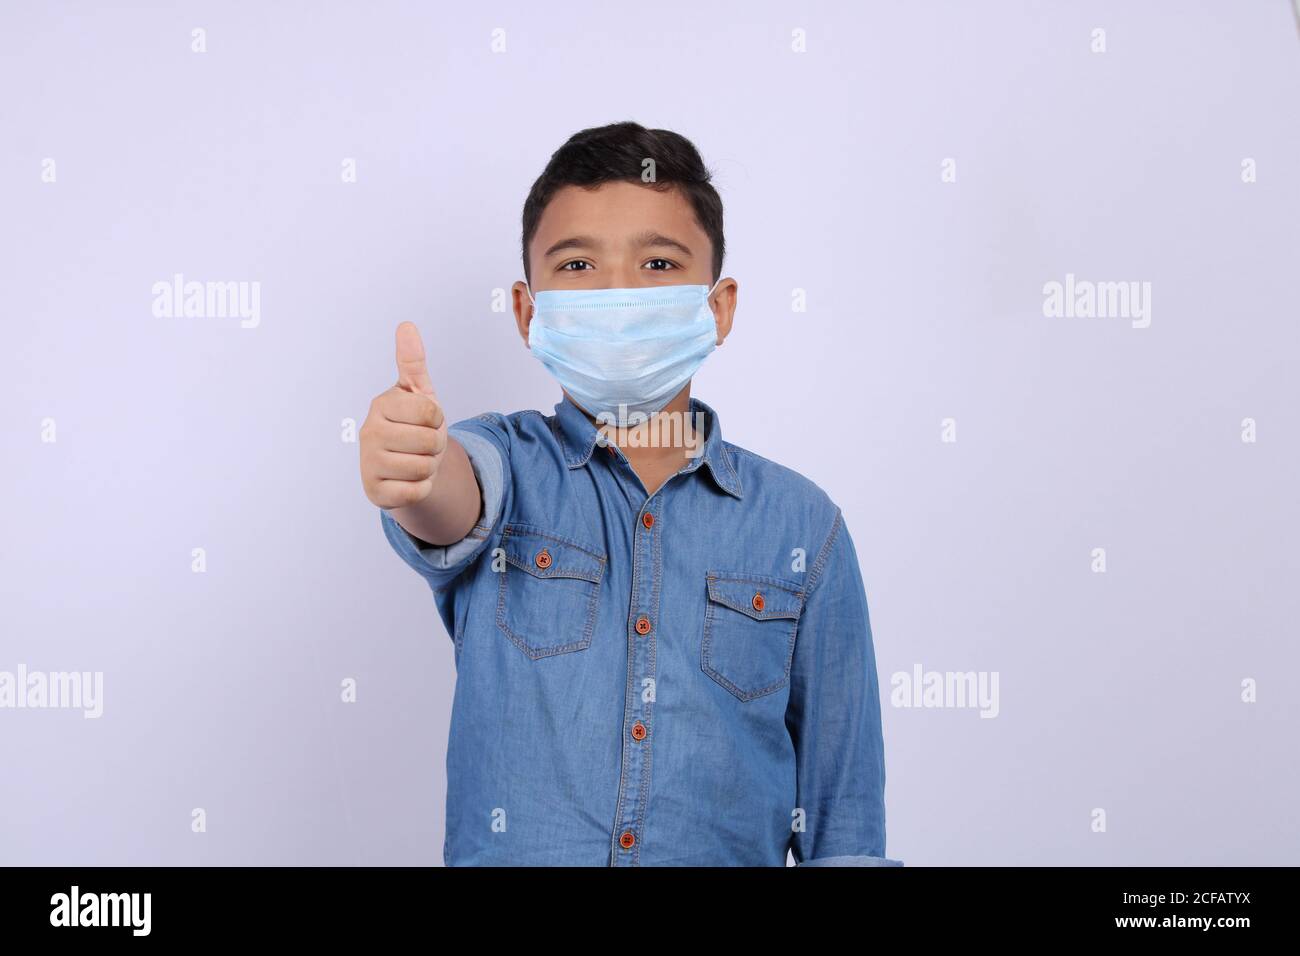 Cute Indian boy wearing surgical mask showing thumbs up or all done or like hand gesture. Isolated over white background. Stock Photo